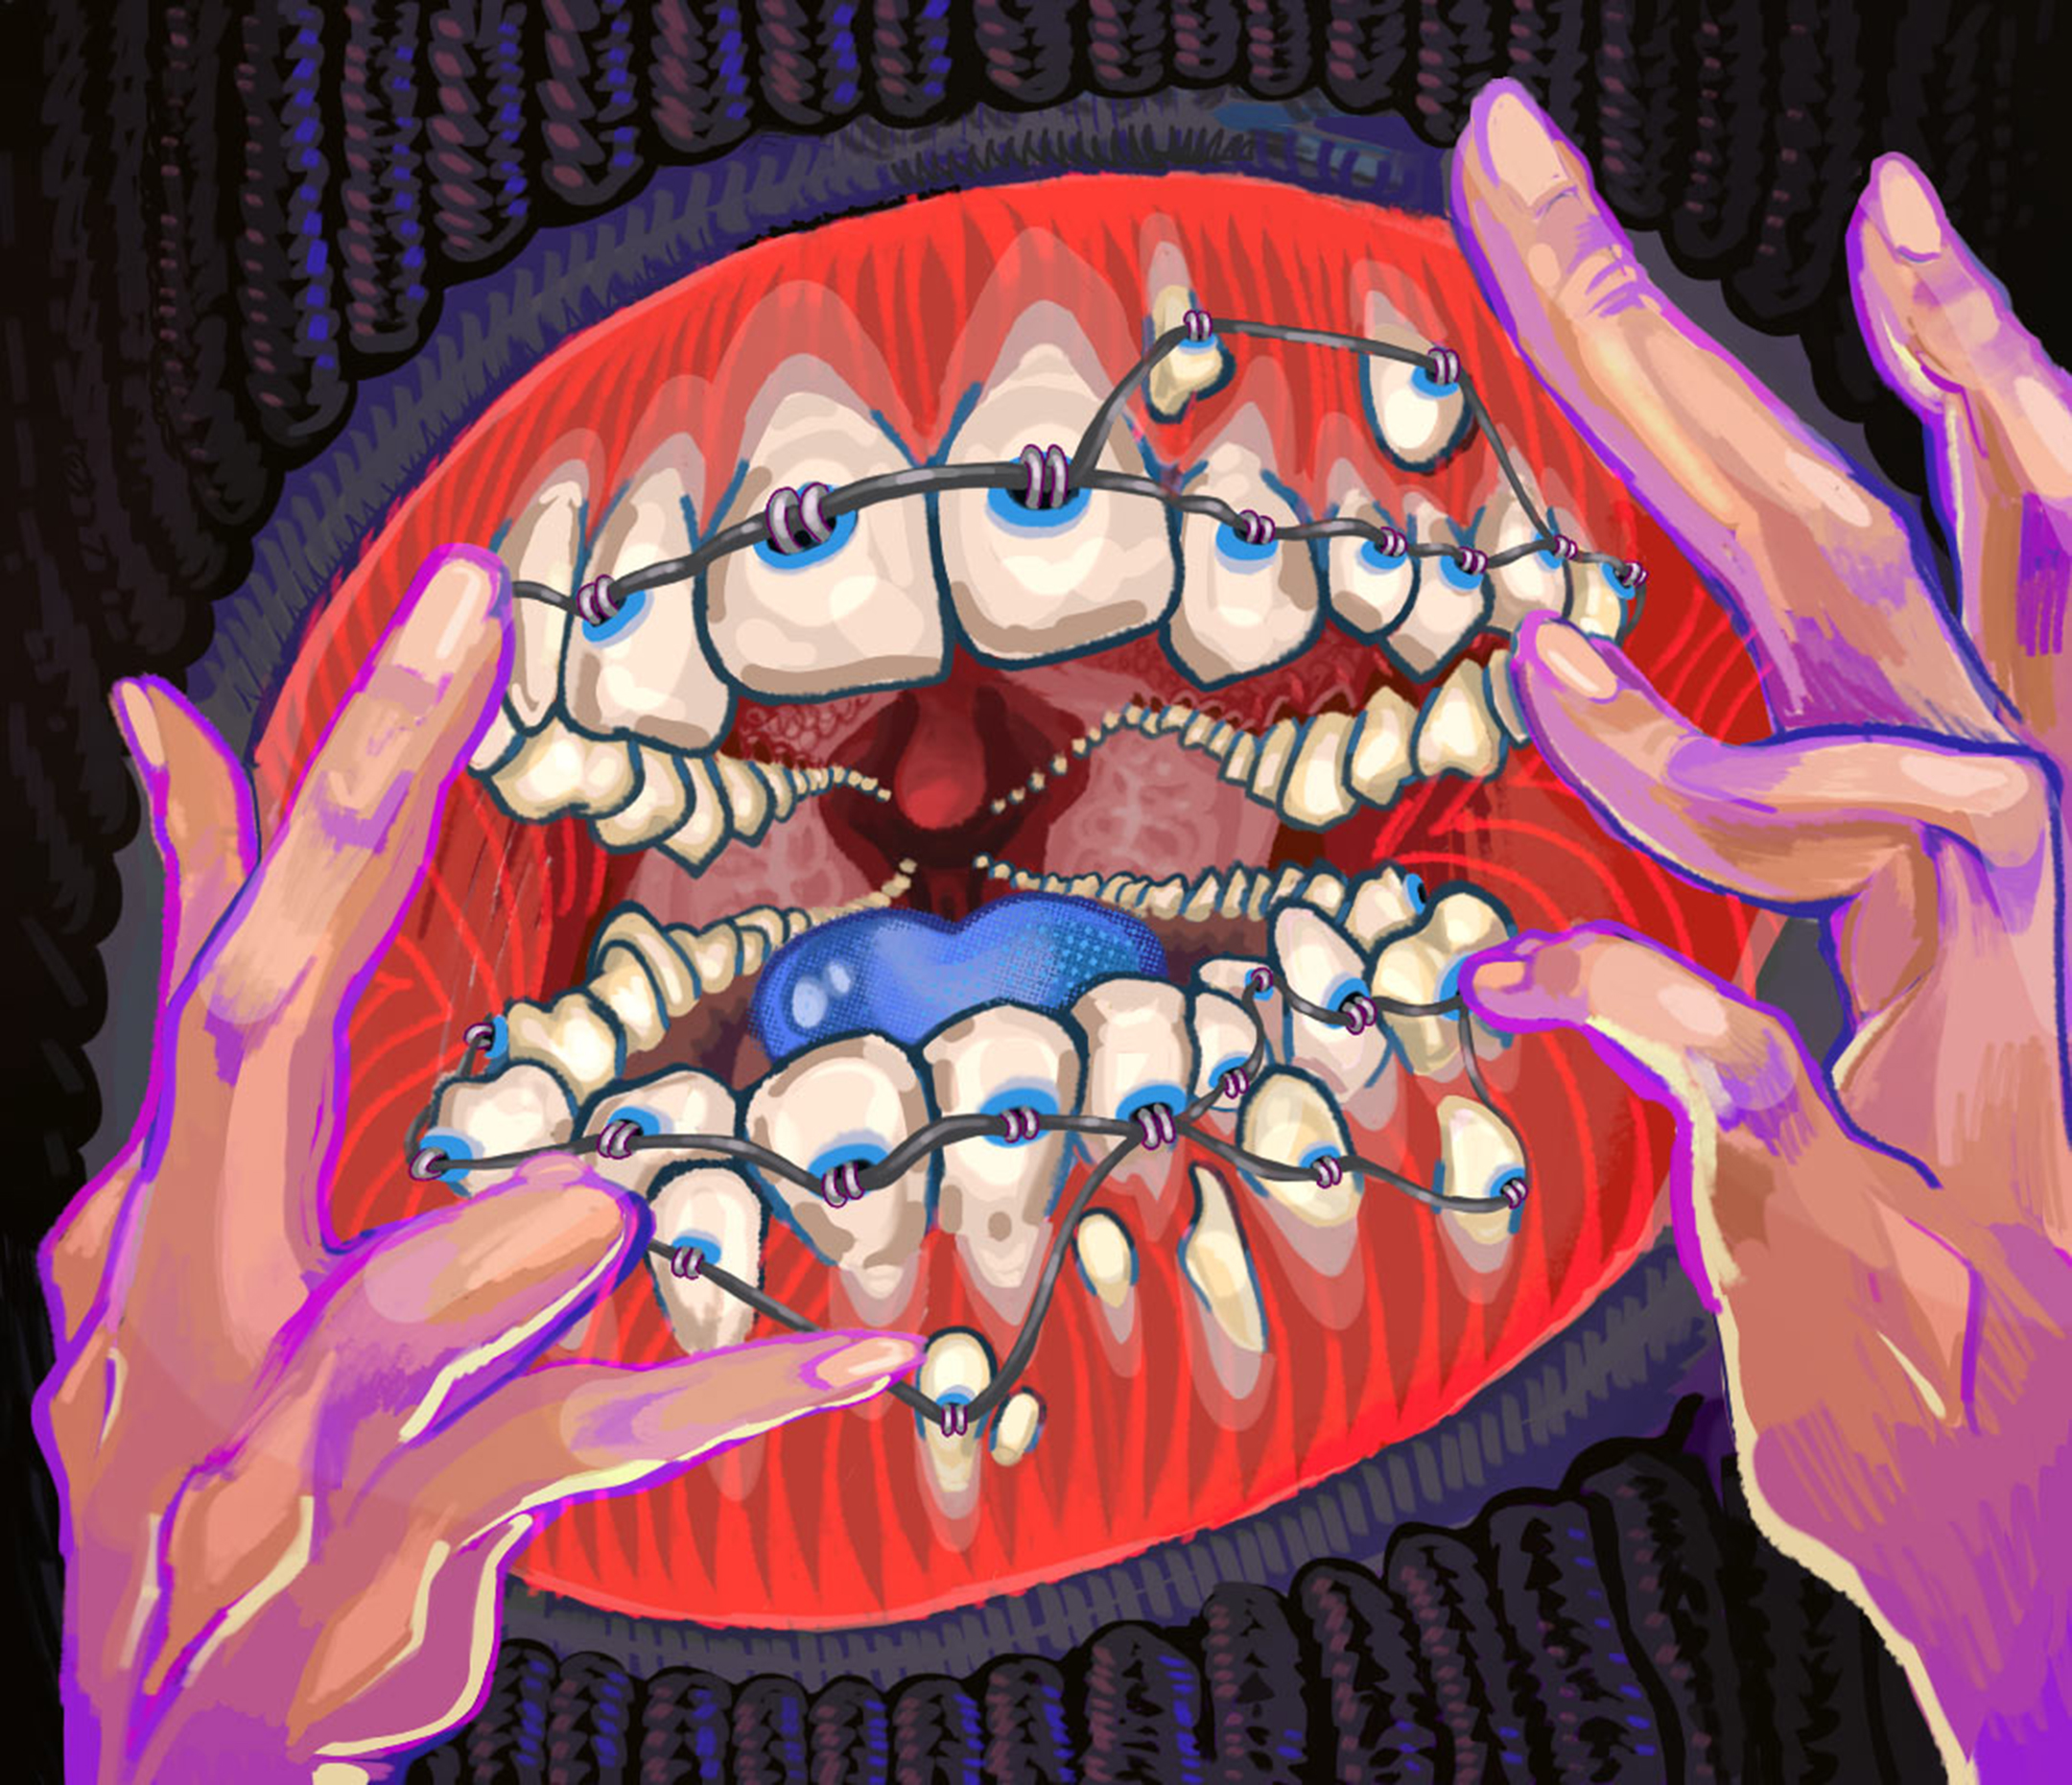 Garish pairing in red, blue, black, and white of two hands holding open a mouth full of teeth with braces